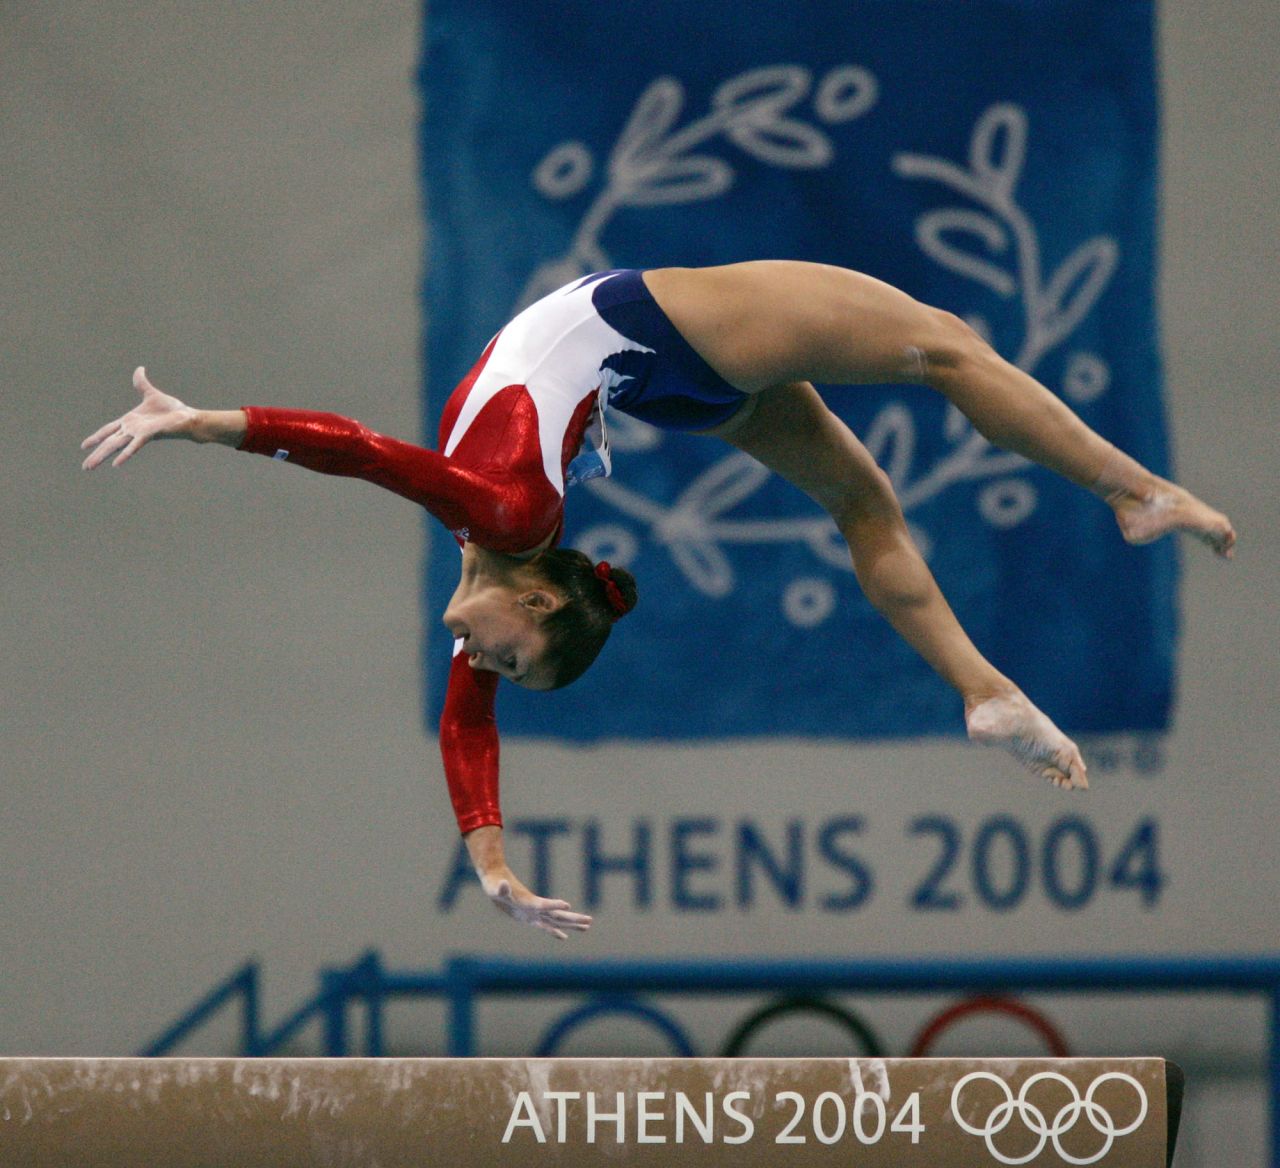 Mohini Bhardwaj performs on the balance beam at the 2004 Olympic Games in Athens, Greece. Bhardwaj defied traditional gymnast stereotypes by competing in the Olympic Games at 25 years old, and she became the first Indian American gymnast to earn an Olympic medal. 